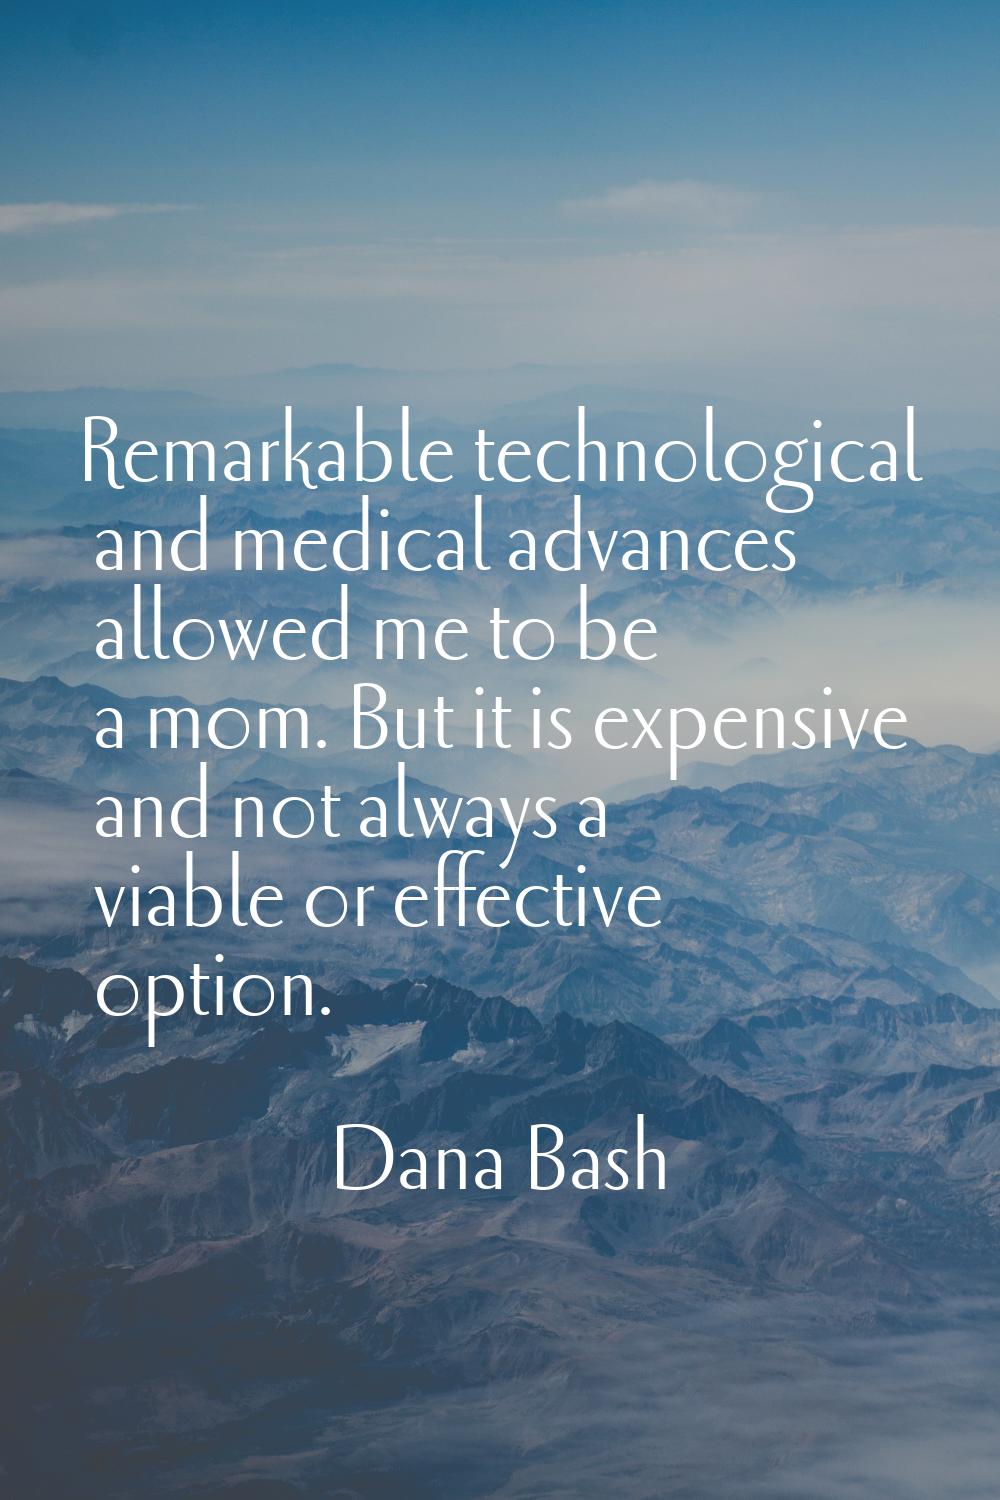 Remarkable technological and medical advances allowed me to be a mom. But it is expensive and not a